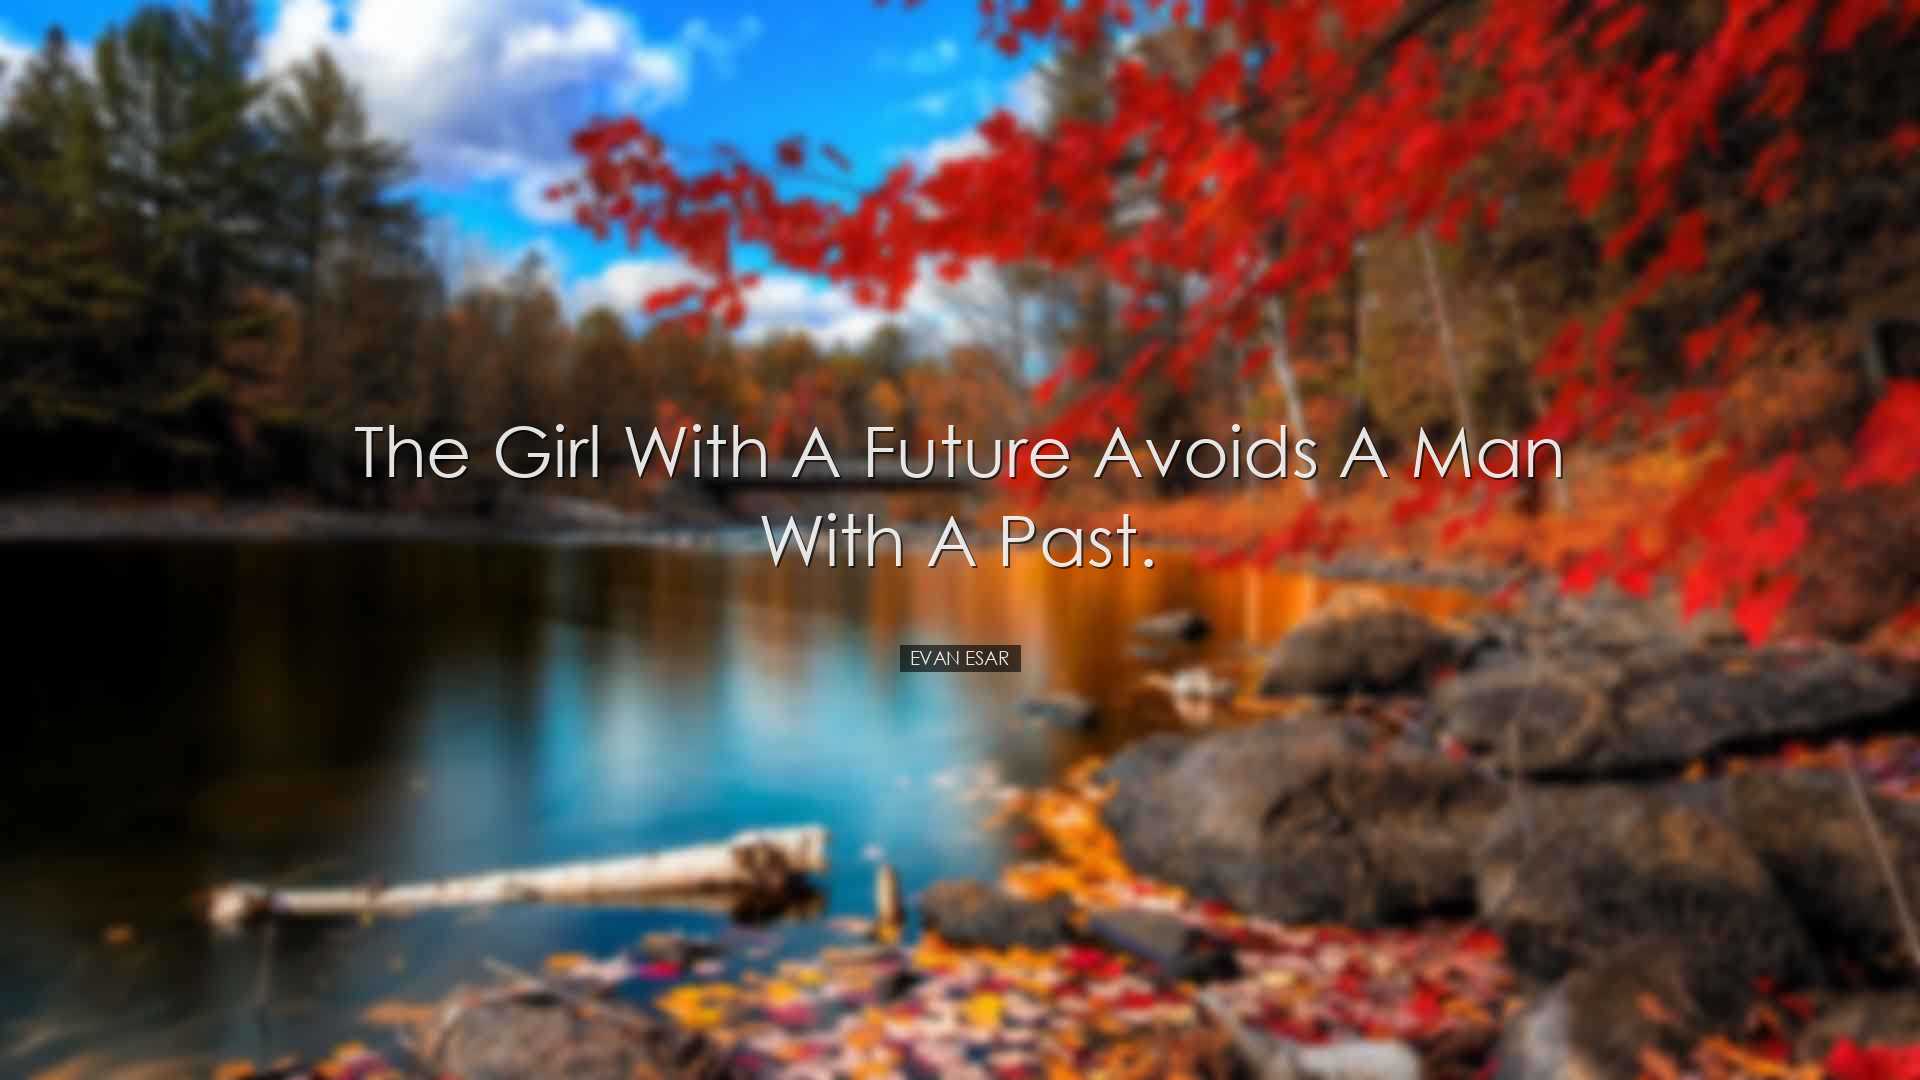 The girl with a future avoids a man with a past. - Evan Esar